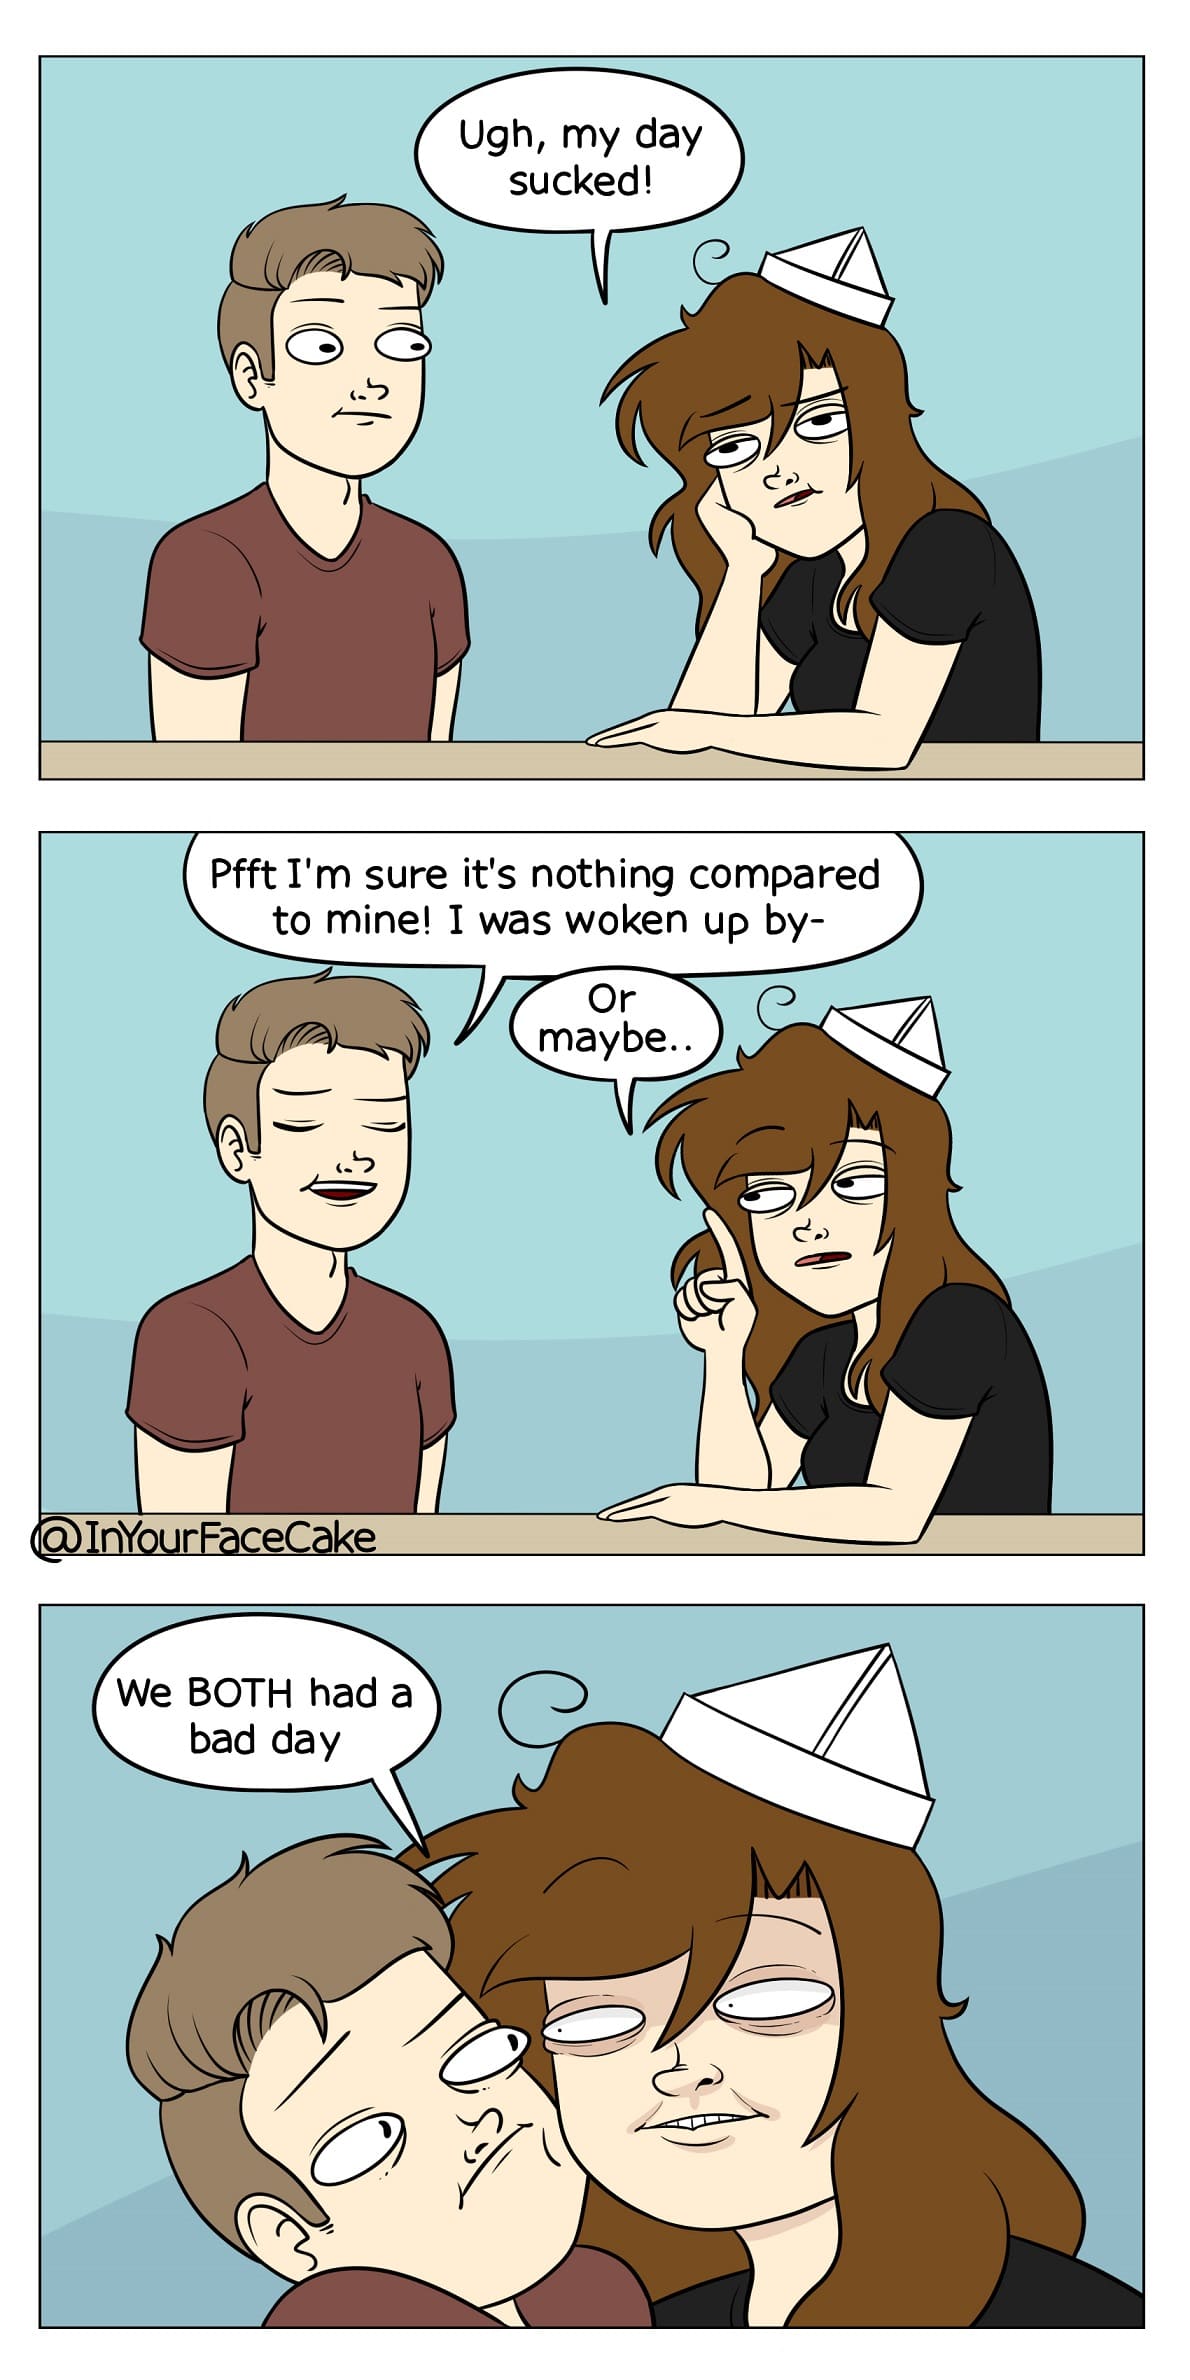 Why not both? (from inyourfacecake), Empathy Comics Why not both? (from inyourfacecake), Empathy text: Ugh, my day sucked! Pfft I'm sure it's nothing compared to mine! I was woken up by- maybe.. we BOTH had a bad day 